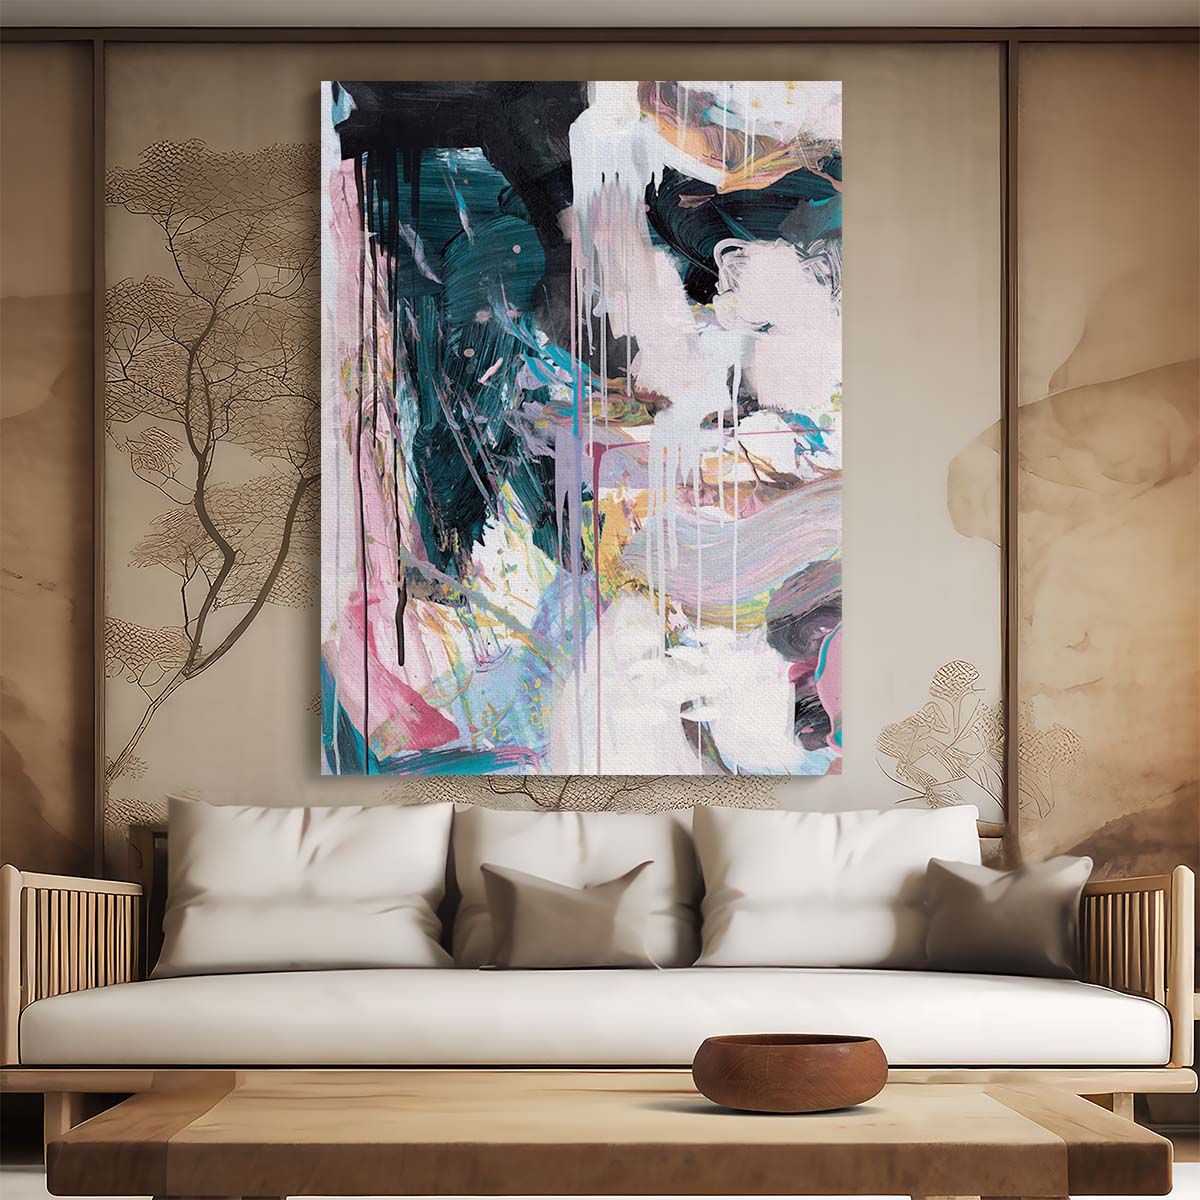 Dan Hobday's Minimalistic Abstract Illustration Blue Pink Dripping Painting by Luxuriance Designs, made in USA